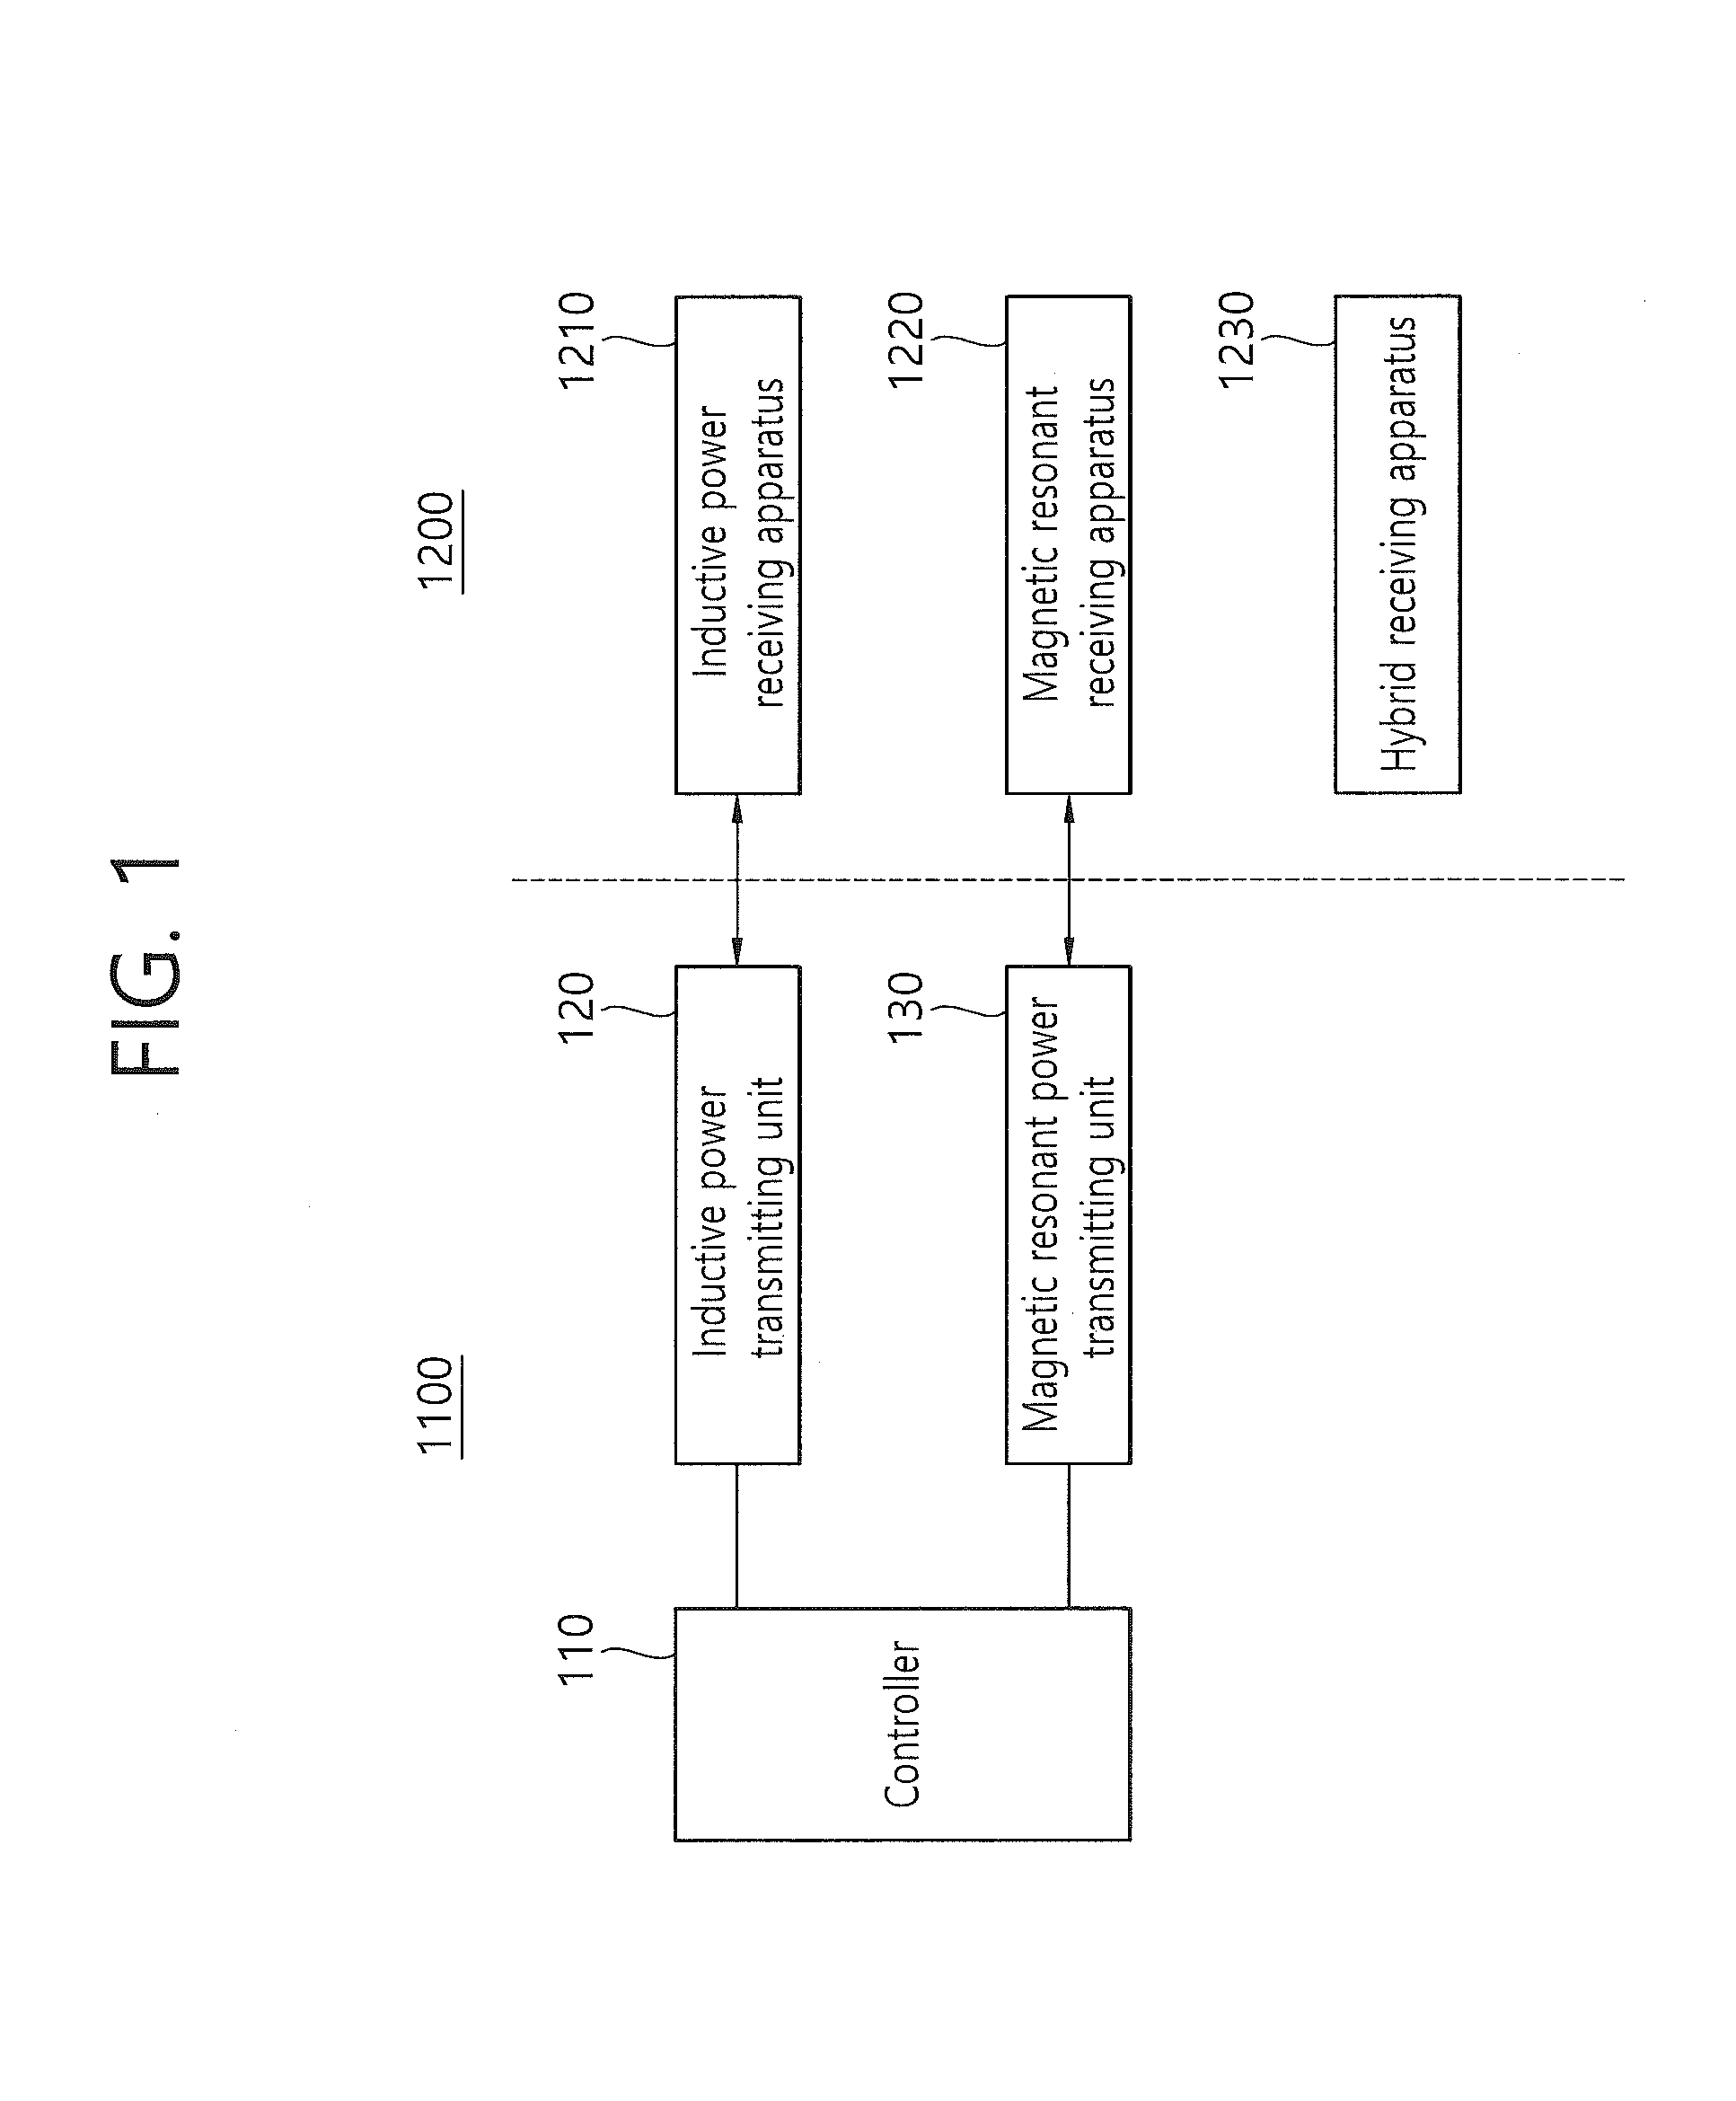 Hybrid wireless power transmitting system and method therefor